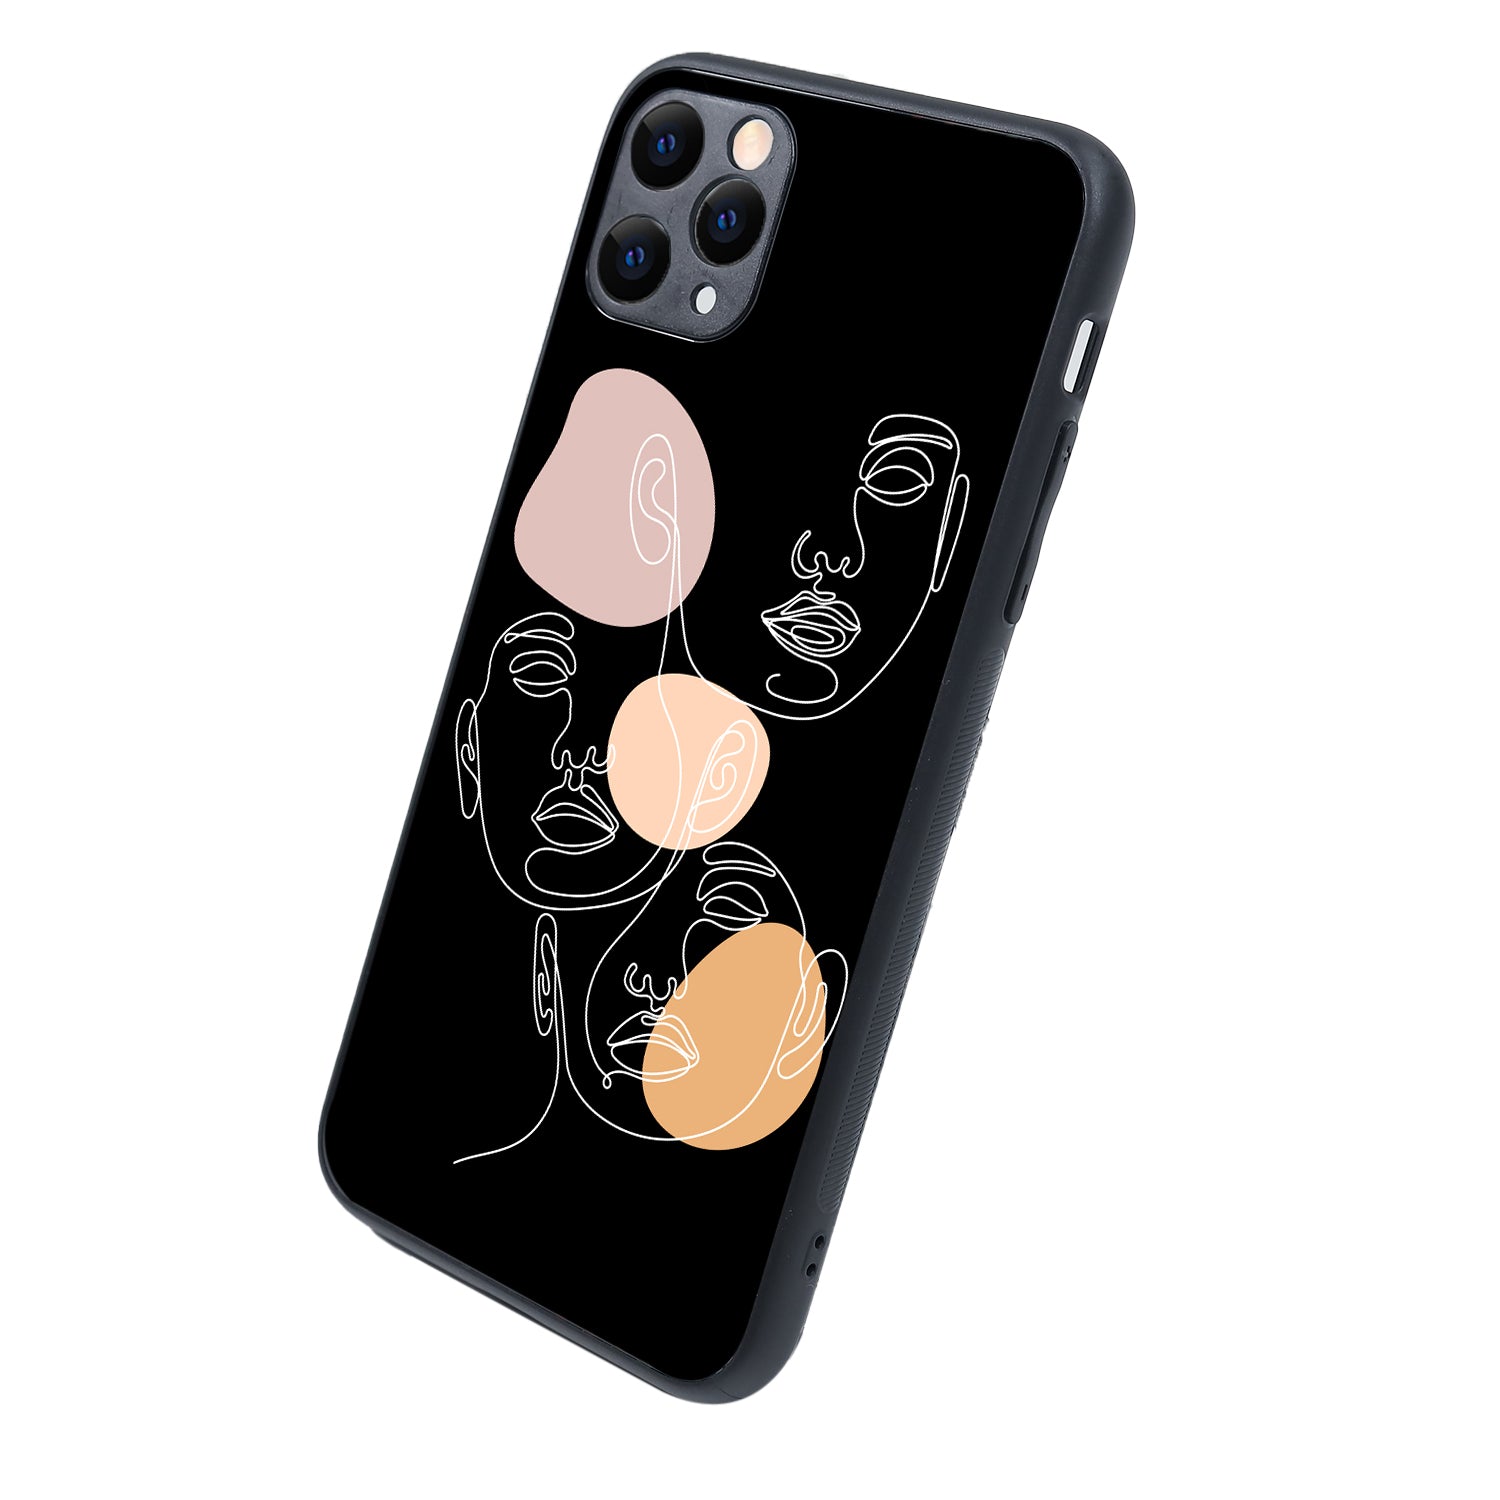 Face Aesthetic Human iPhone 11 Pro Max Case